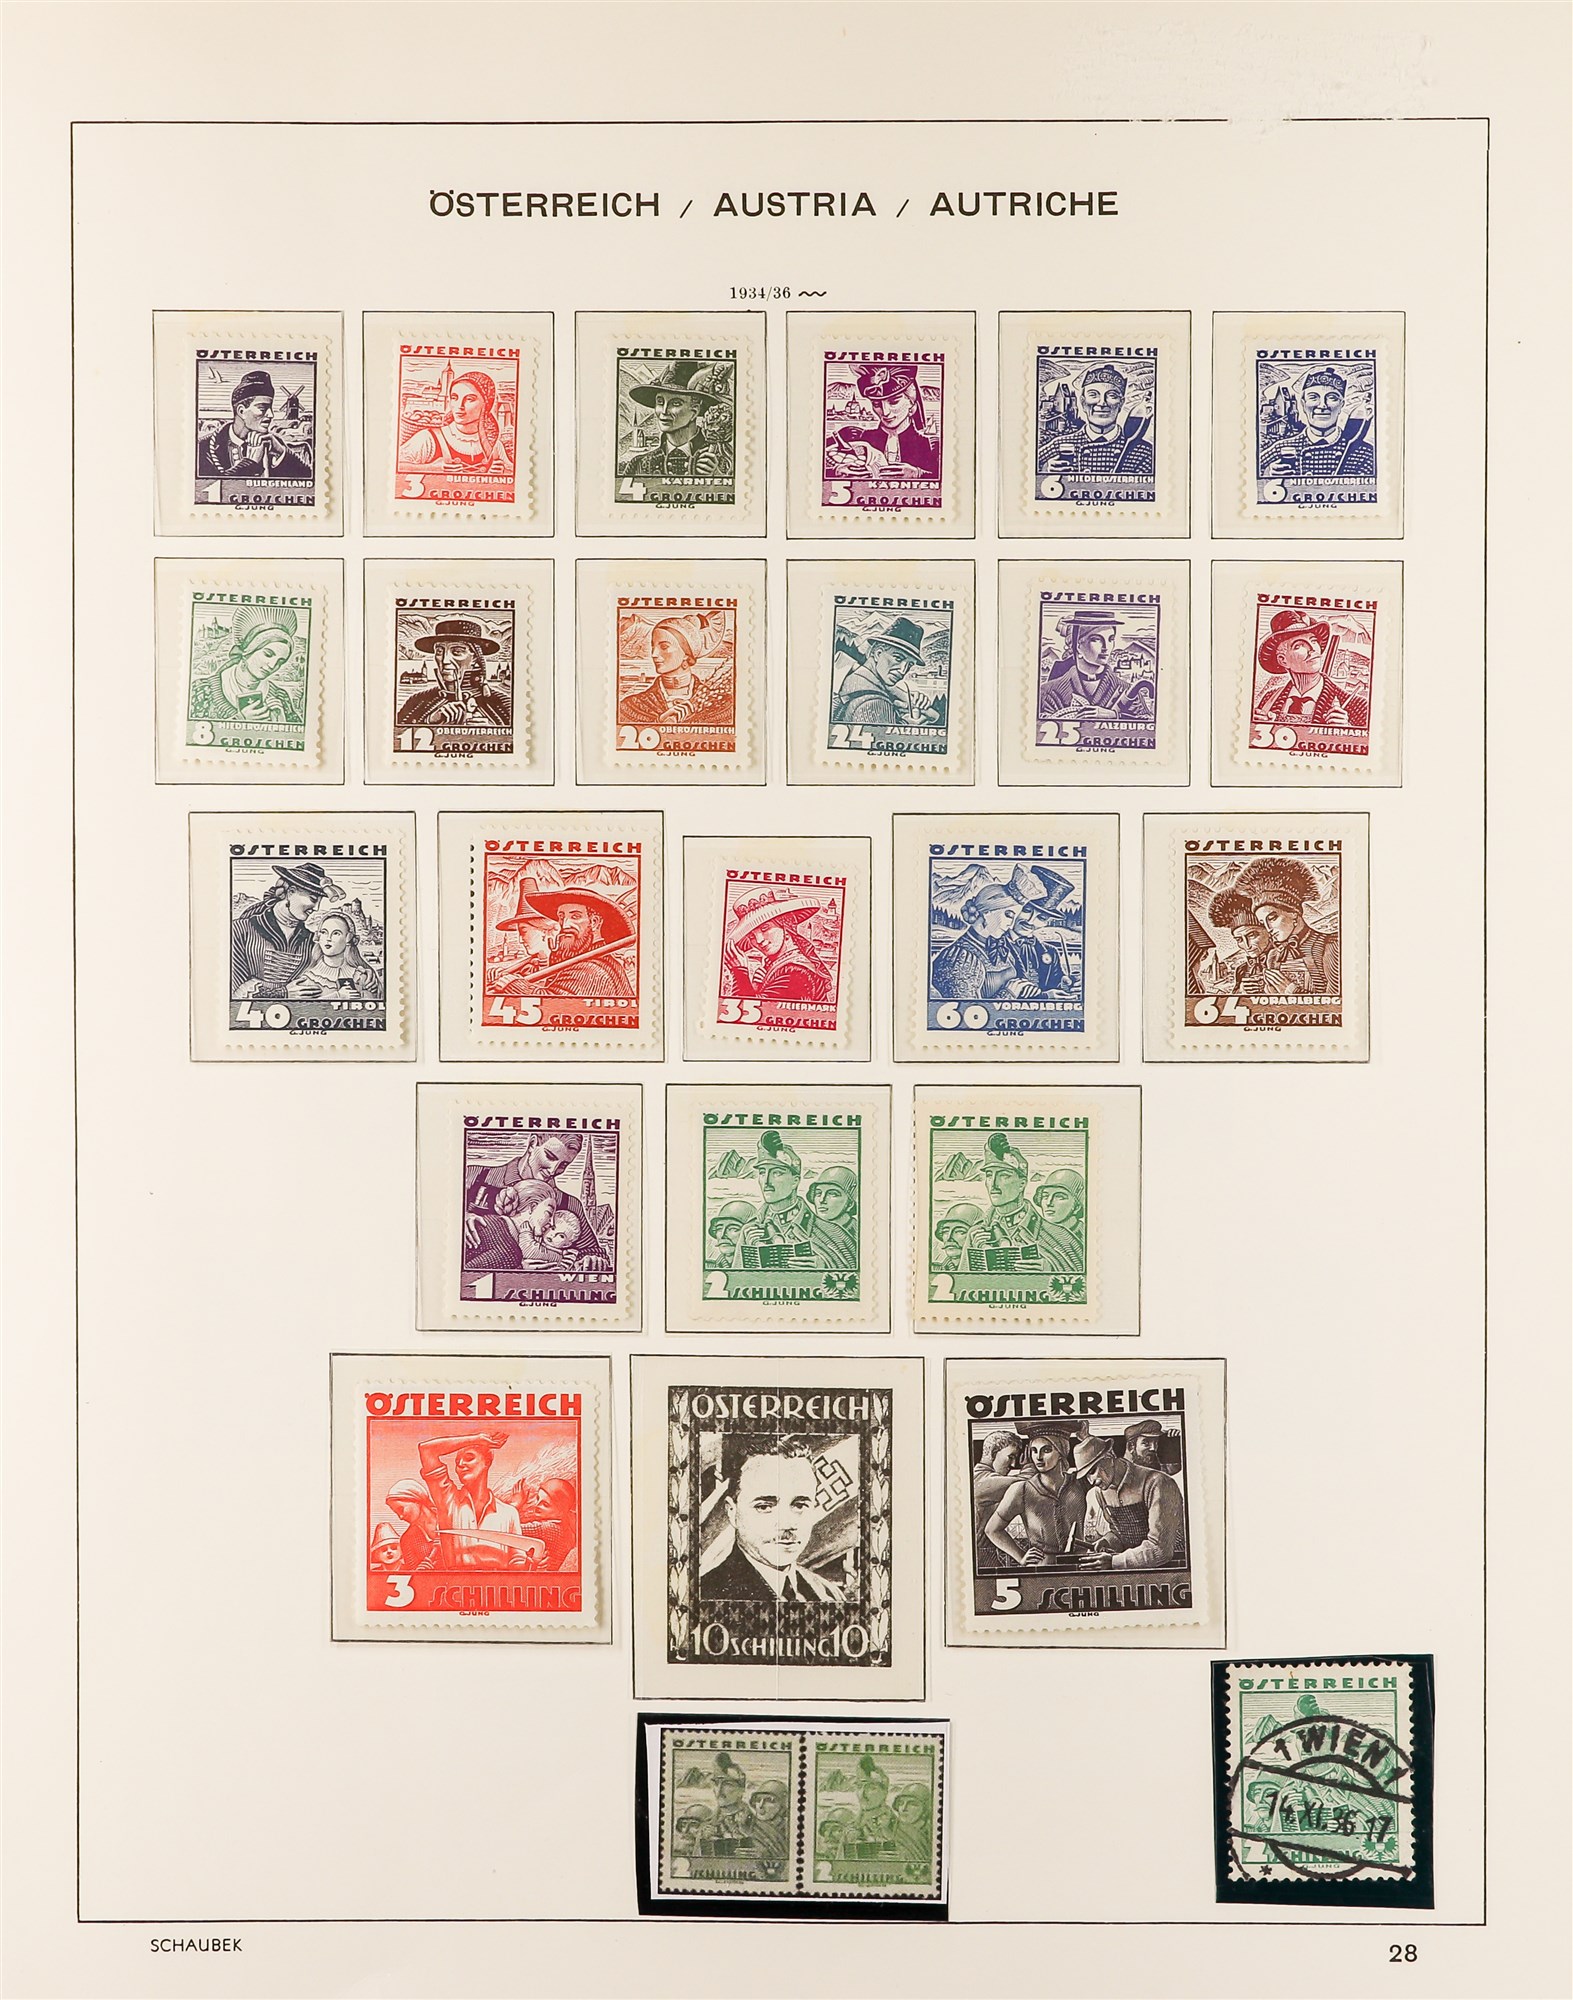 AUSTRIA 1850 - 1937 COLLECTION. of around 1000 mint & used stamps in Schaubek Austria hingeless - Image 21 of 29